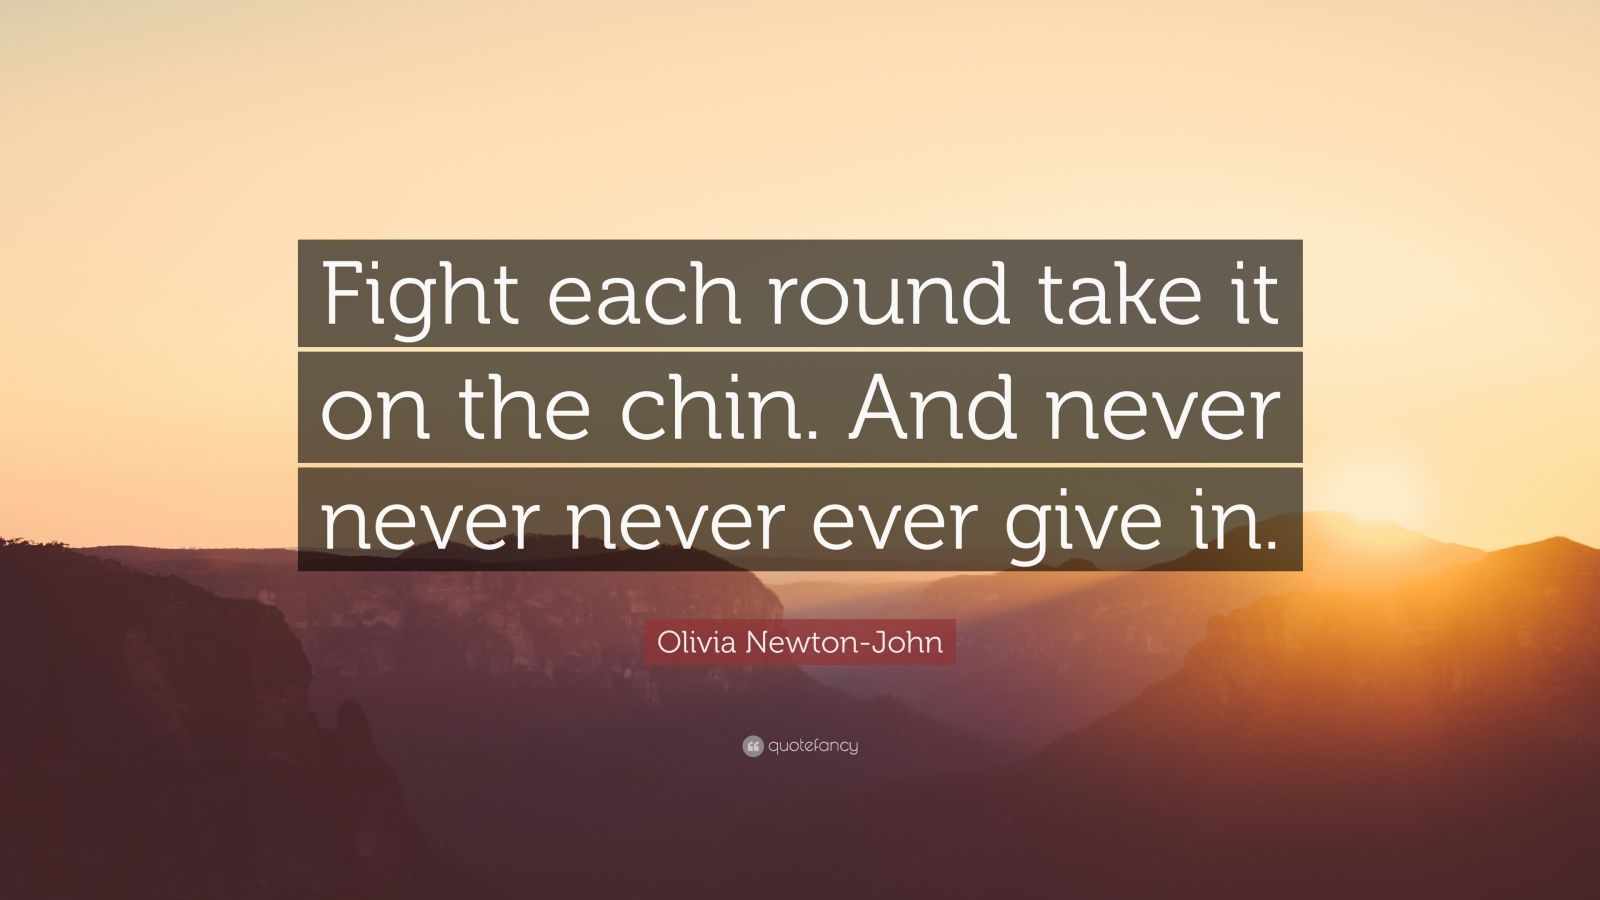 Olivia Newton-John Quote: “Fight each round take it on the chin. And